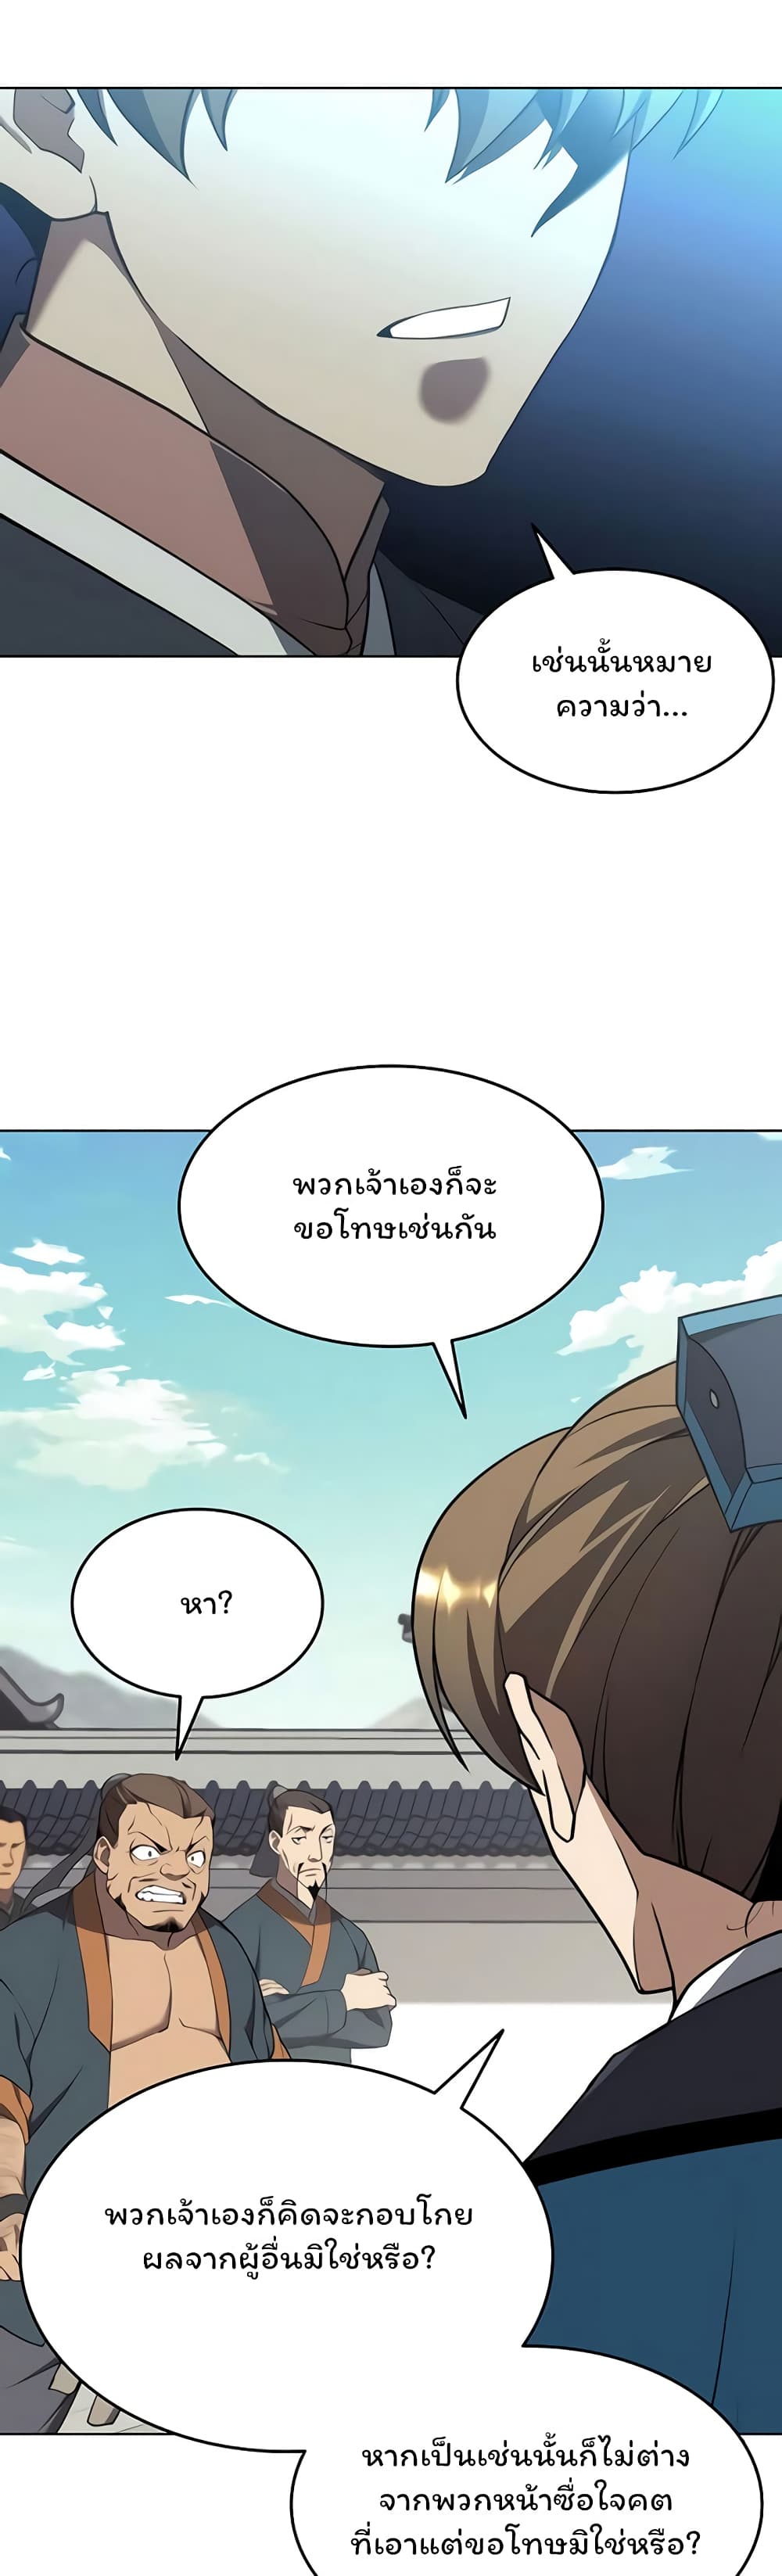 Tale of a Scribe Who Retires to the Countryside ตอนที่ 98 (29)